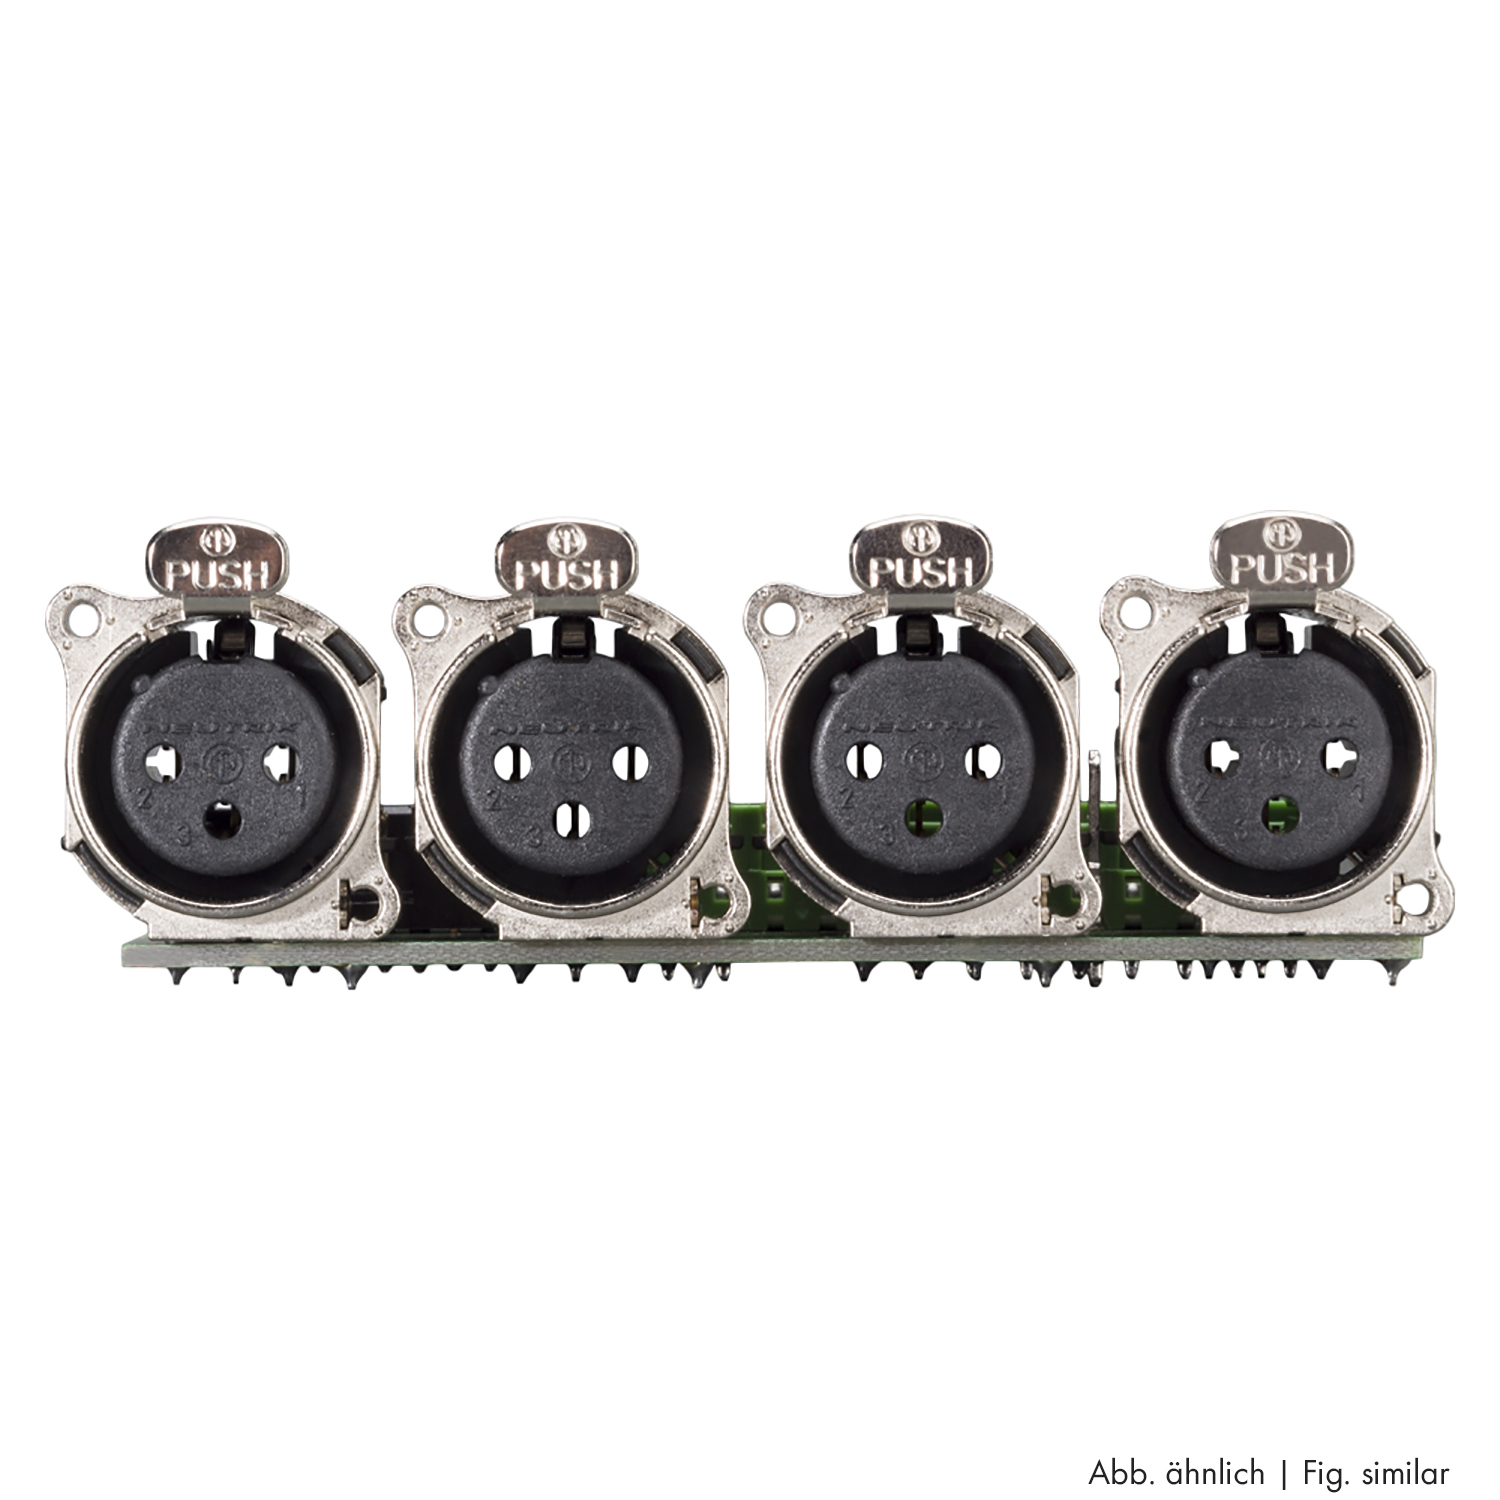 Connector Module 4 x XLR B-Series female, 3-pole , 1 HE, 3 BE, metal-, 12 lift terminals, 14-pole blade terminal-, silver plated contact(s), nickel, for SYS-series